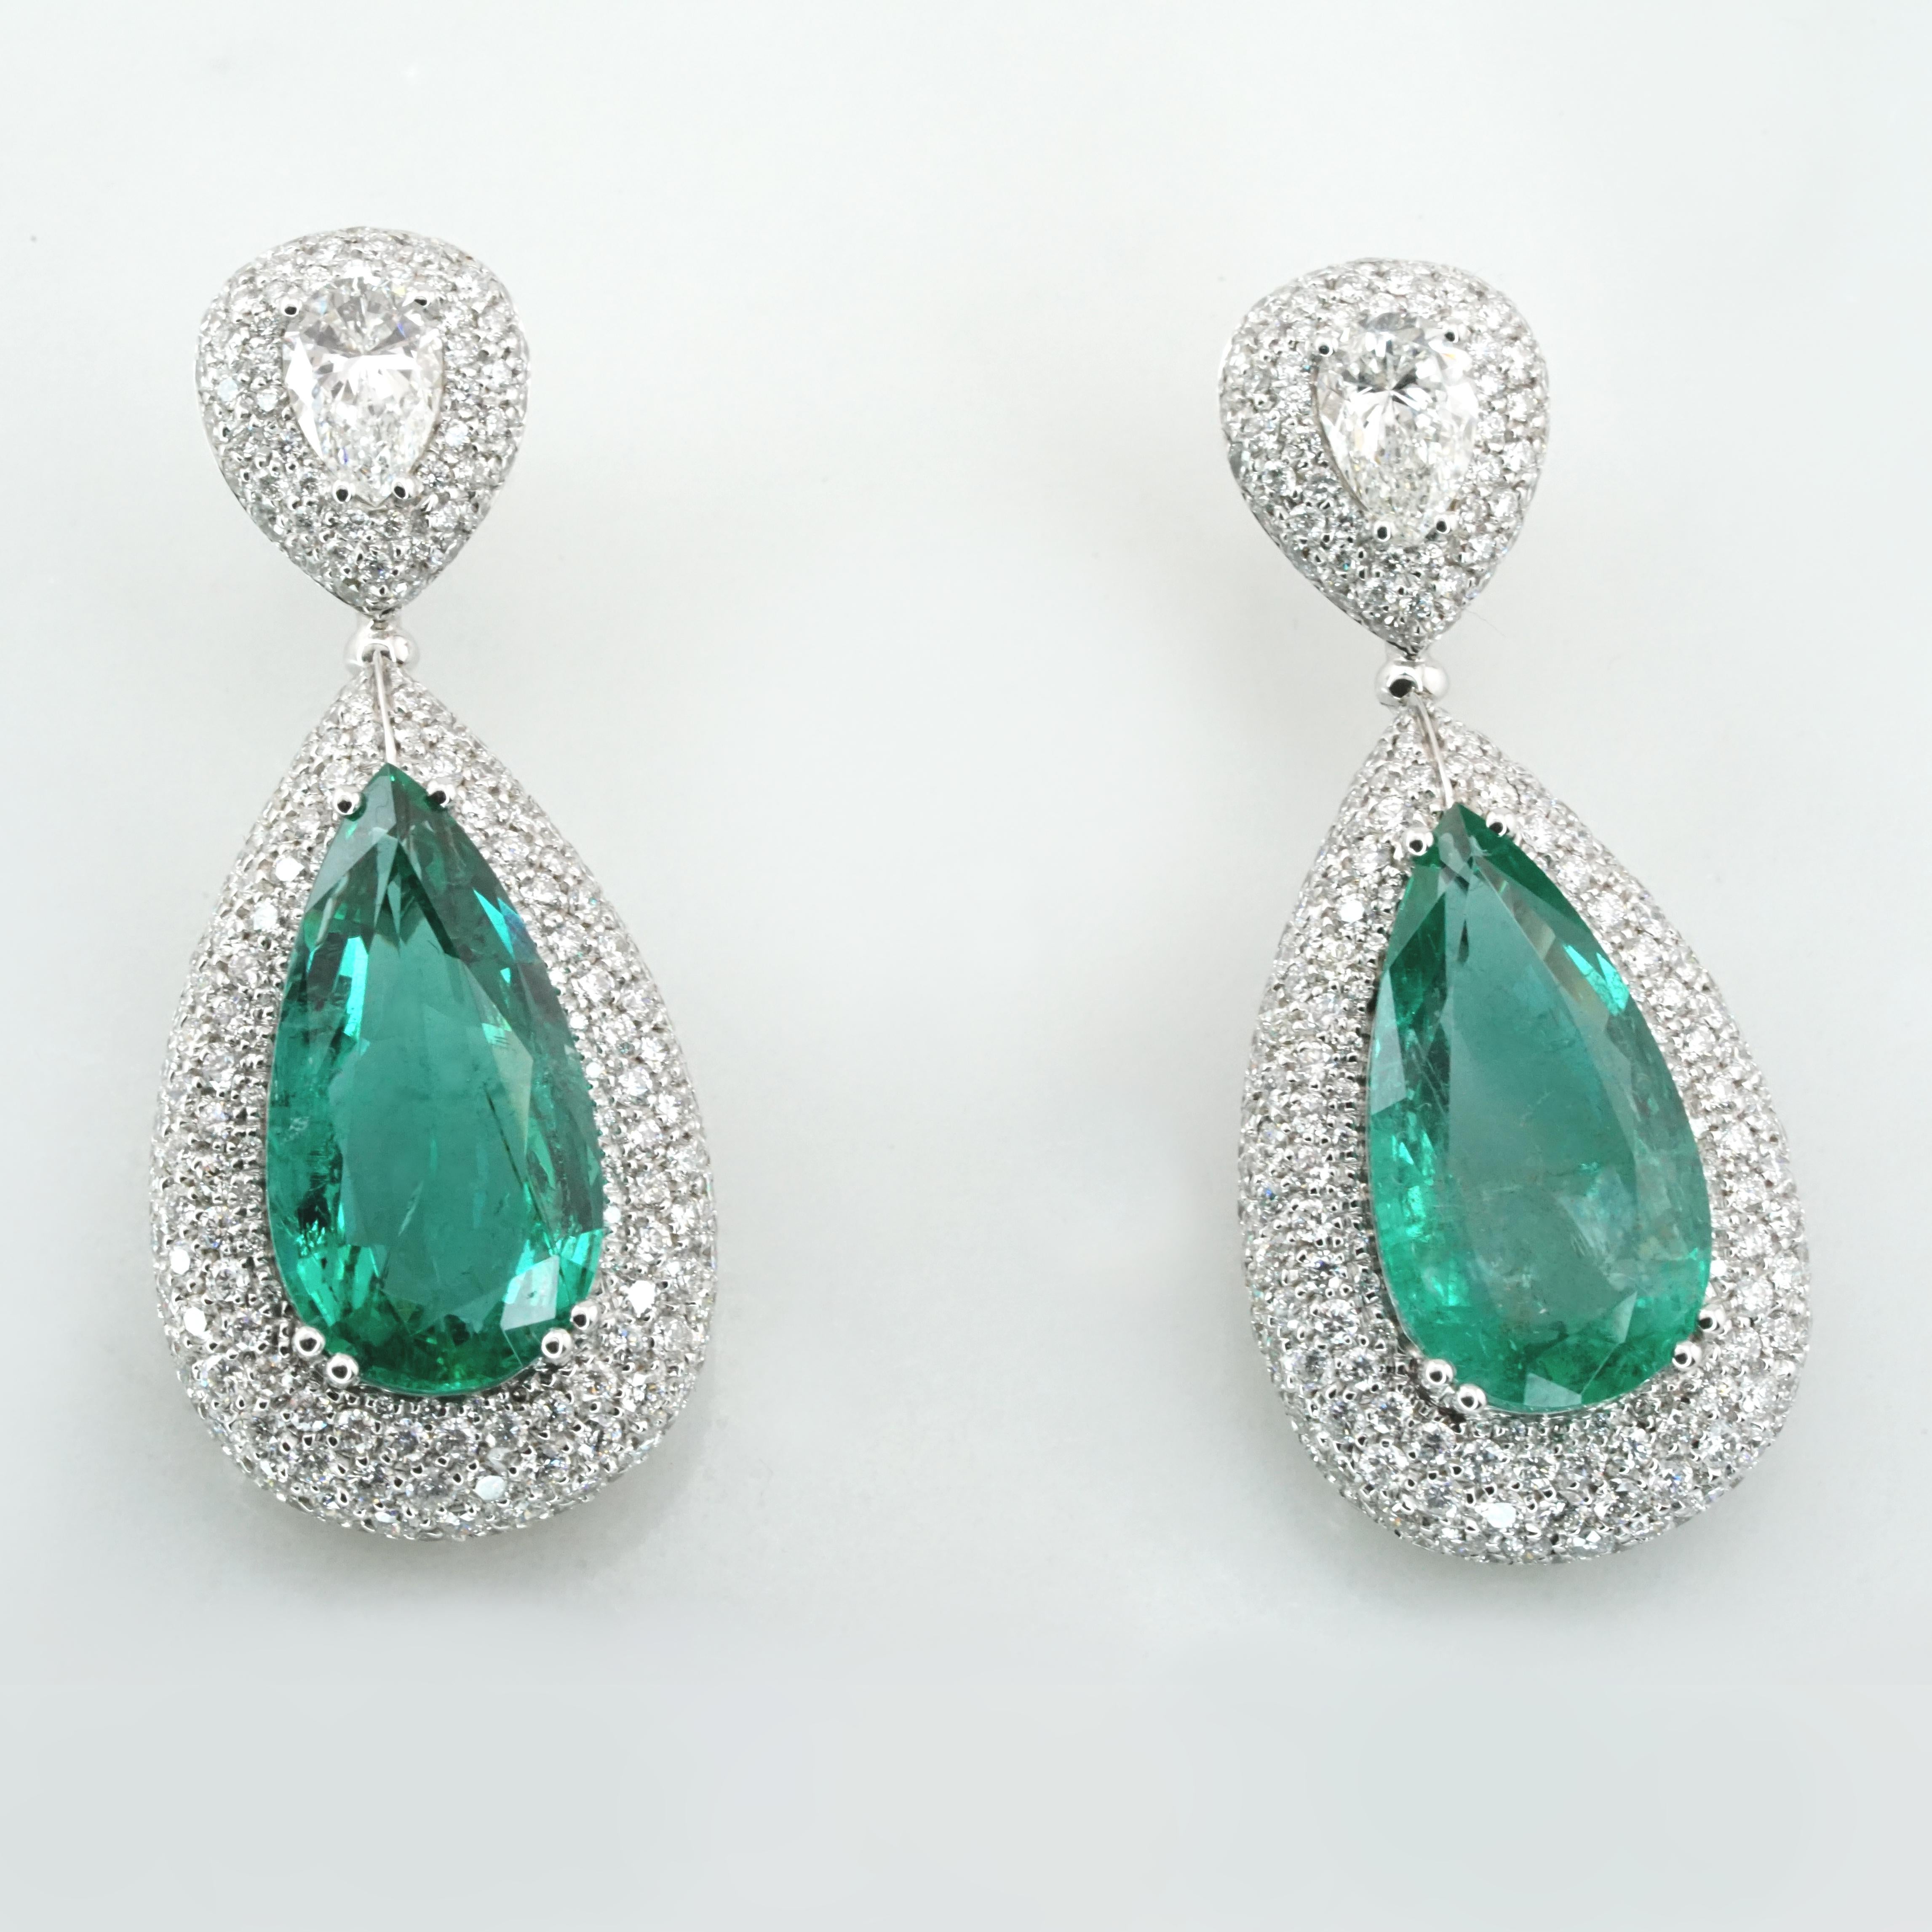 Contemporary IGI and GIA Certified 13 Carat Pear Cut Green Emerald Diamond Earrings For Sale